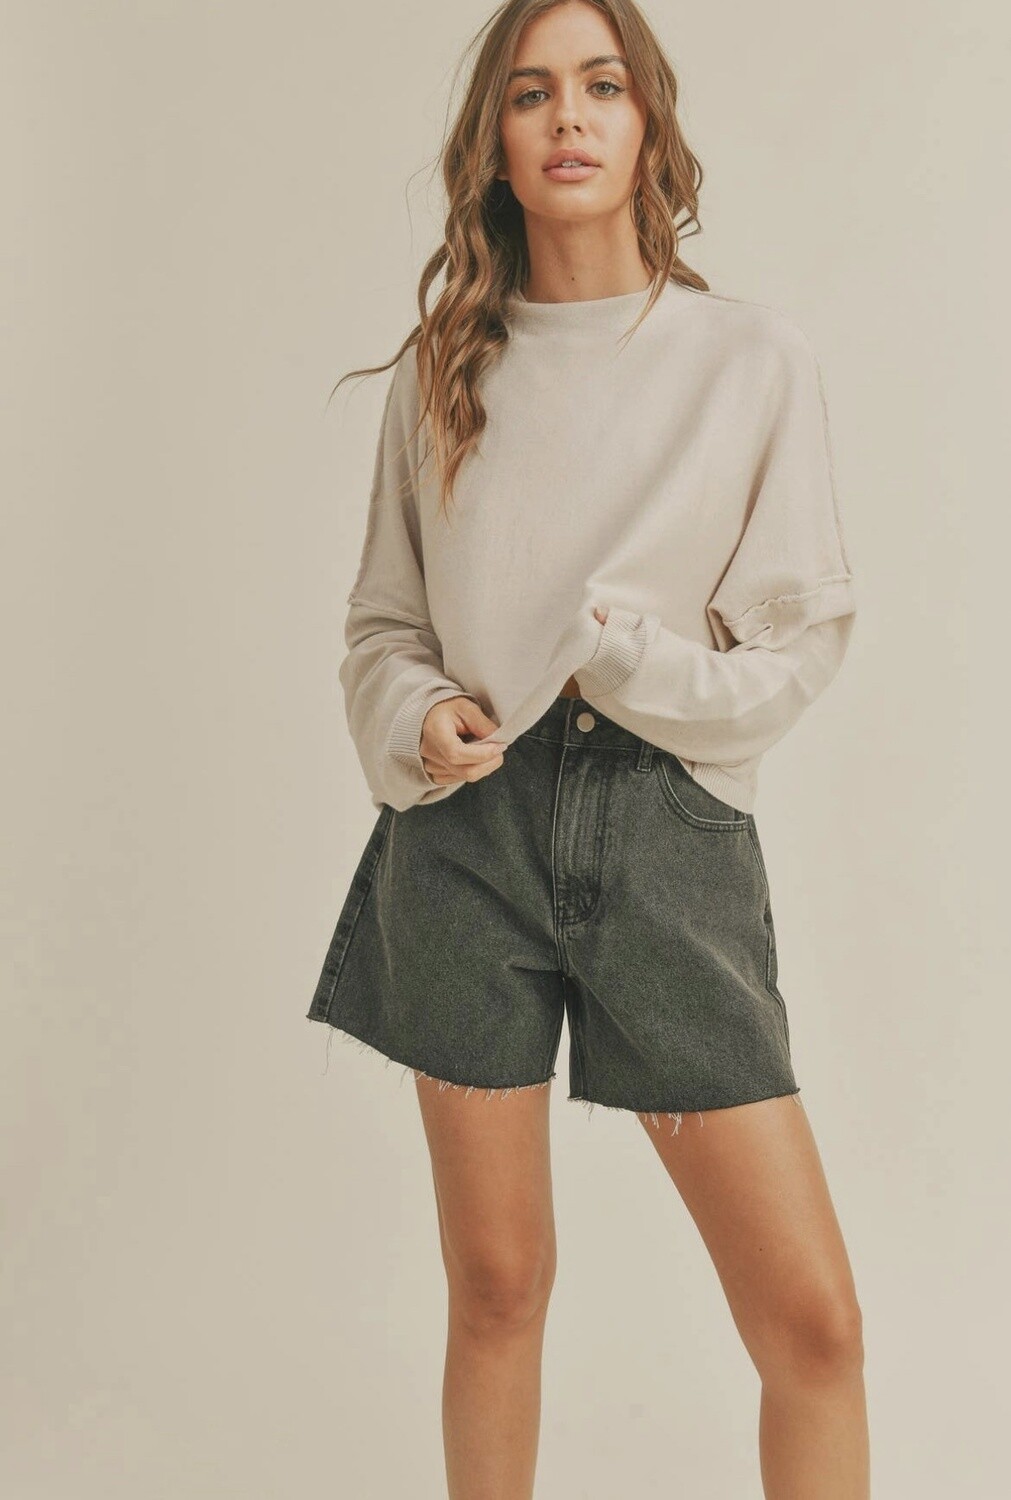 Turtle Neck Soft Sweater Top